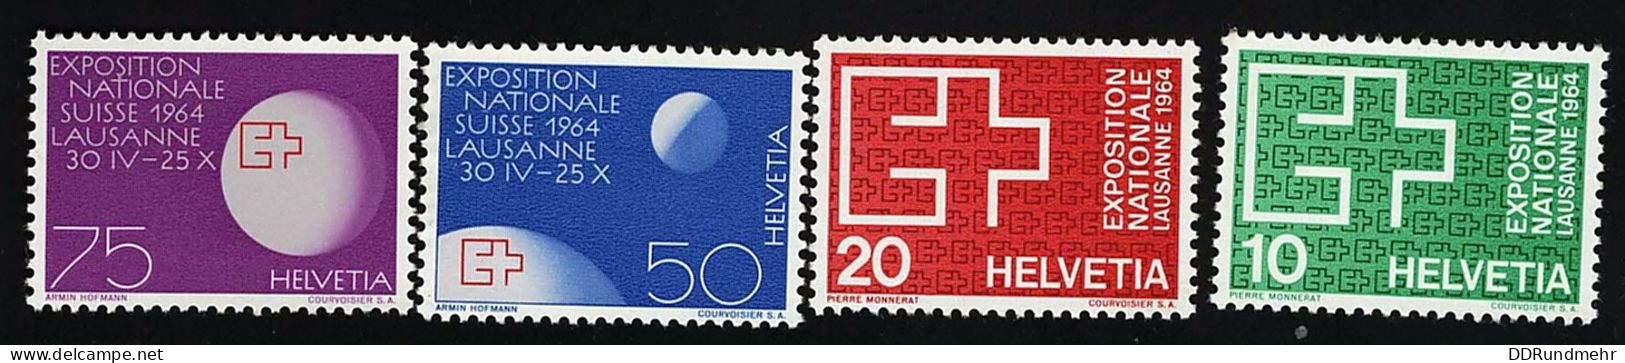 1963 Expo Lausanne  Michel CH 782 - 785 Stamp Number CH 430 - 433 Yvert Et Tellier CH 717 - 720 Xx MNH - Unused Stamps